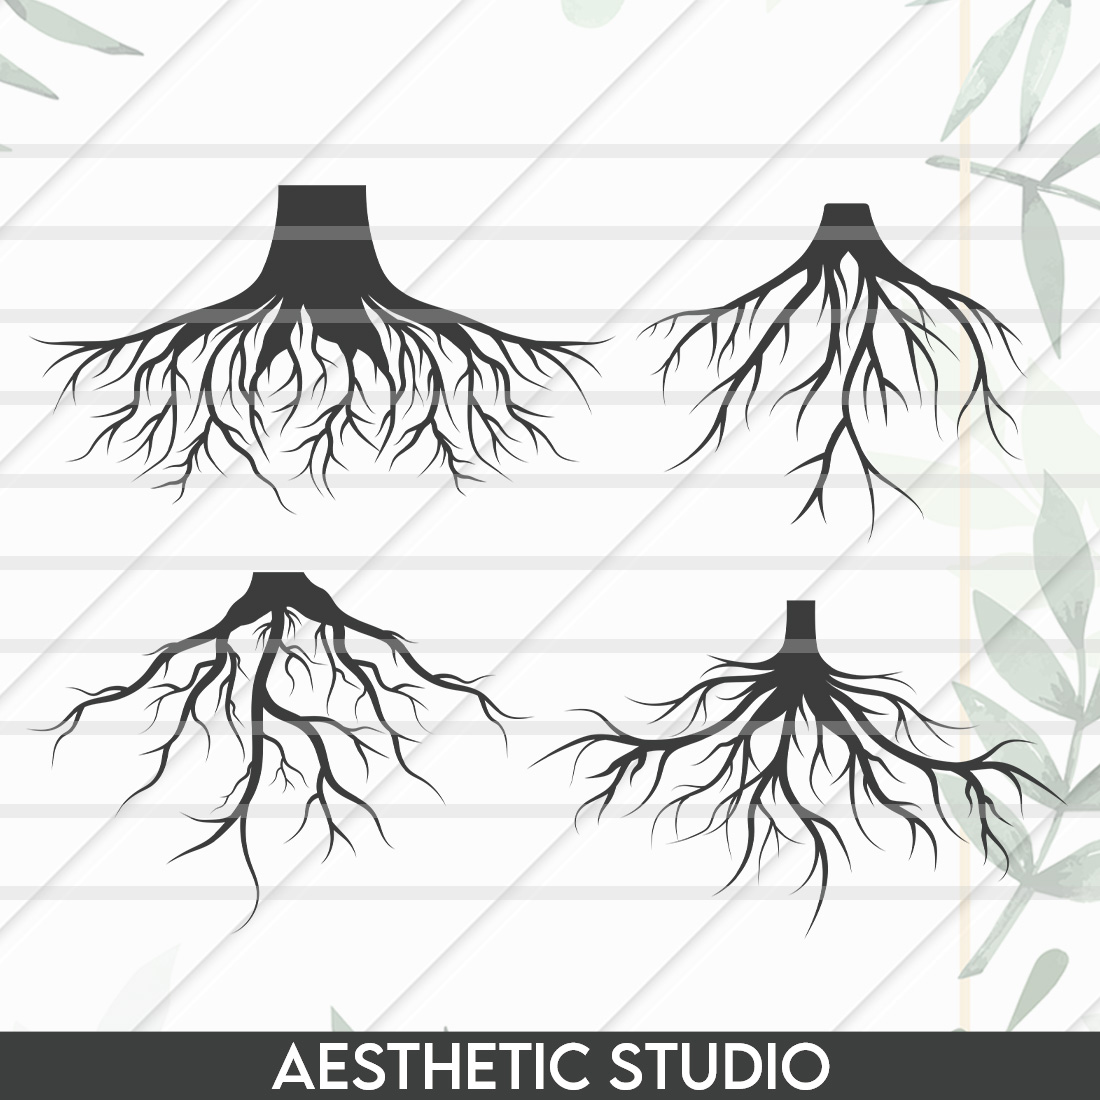 Root SVG, Root, Taproot, Tree Roots, Roots Clipart, Family Tree, Clipart, Silhouette, SVG, Root Hair, Eps, Vector, Silhouette, Vector, Outline, Cut file preview image.